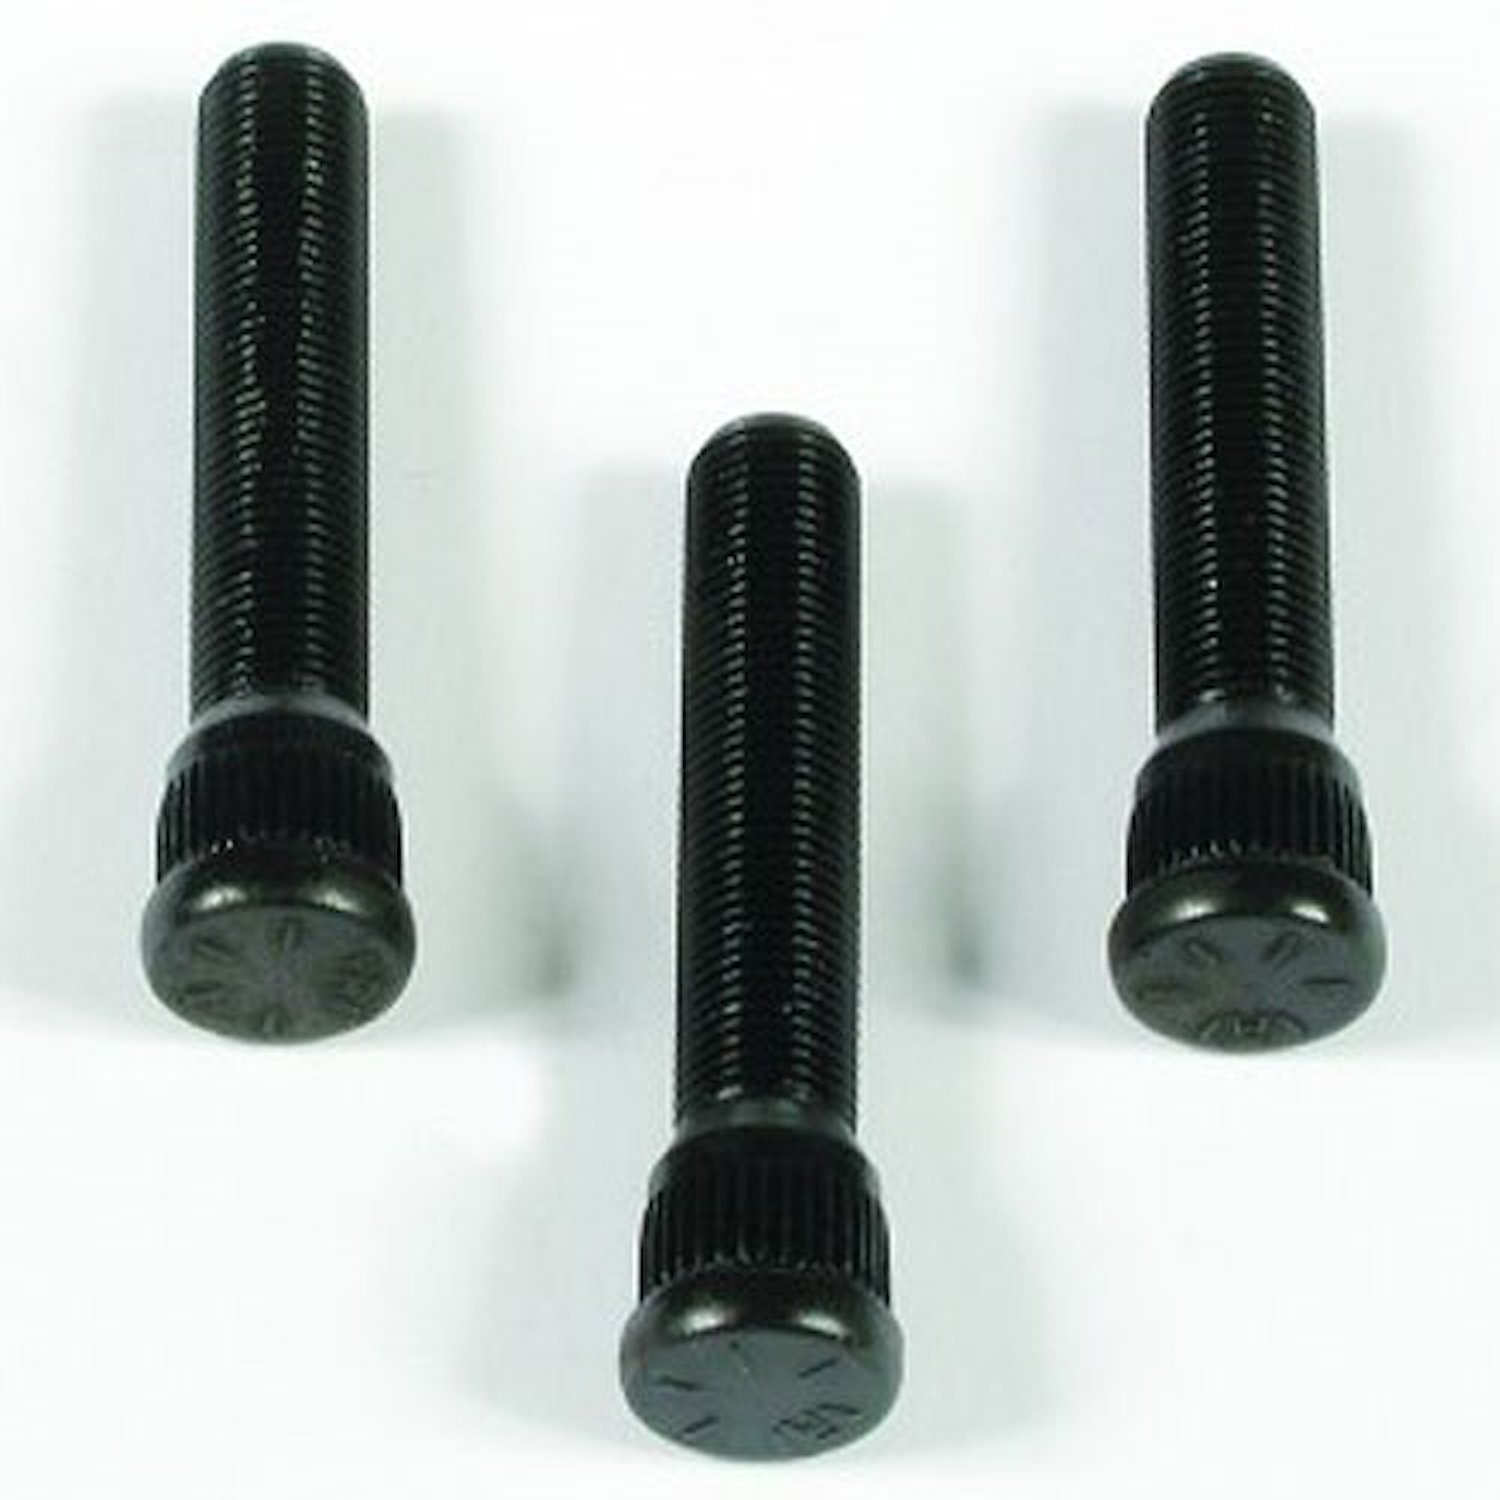 Competition Wheel Studs Chrysler, Ford, and Most Applications